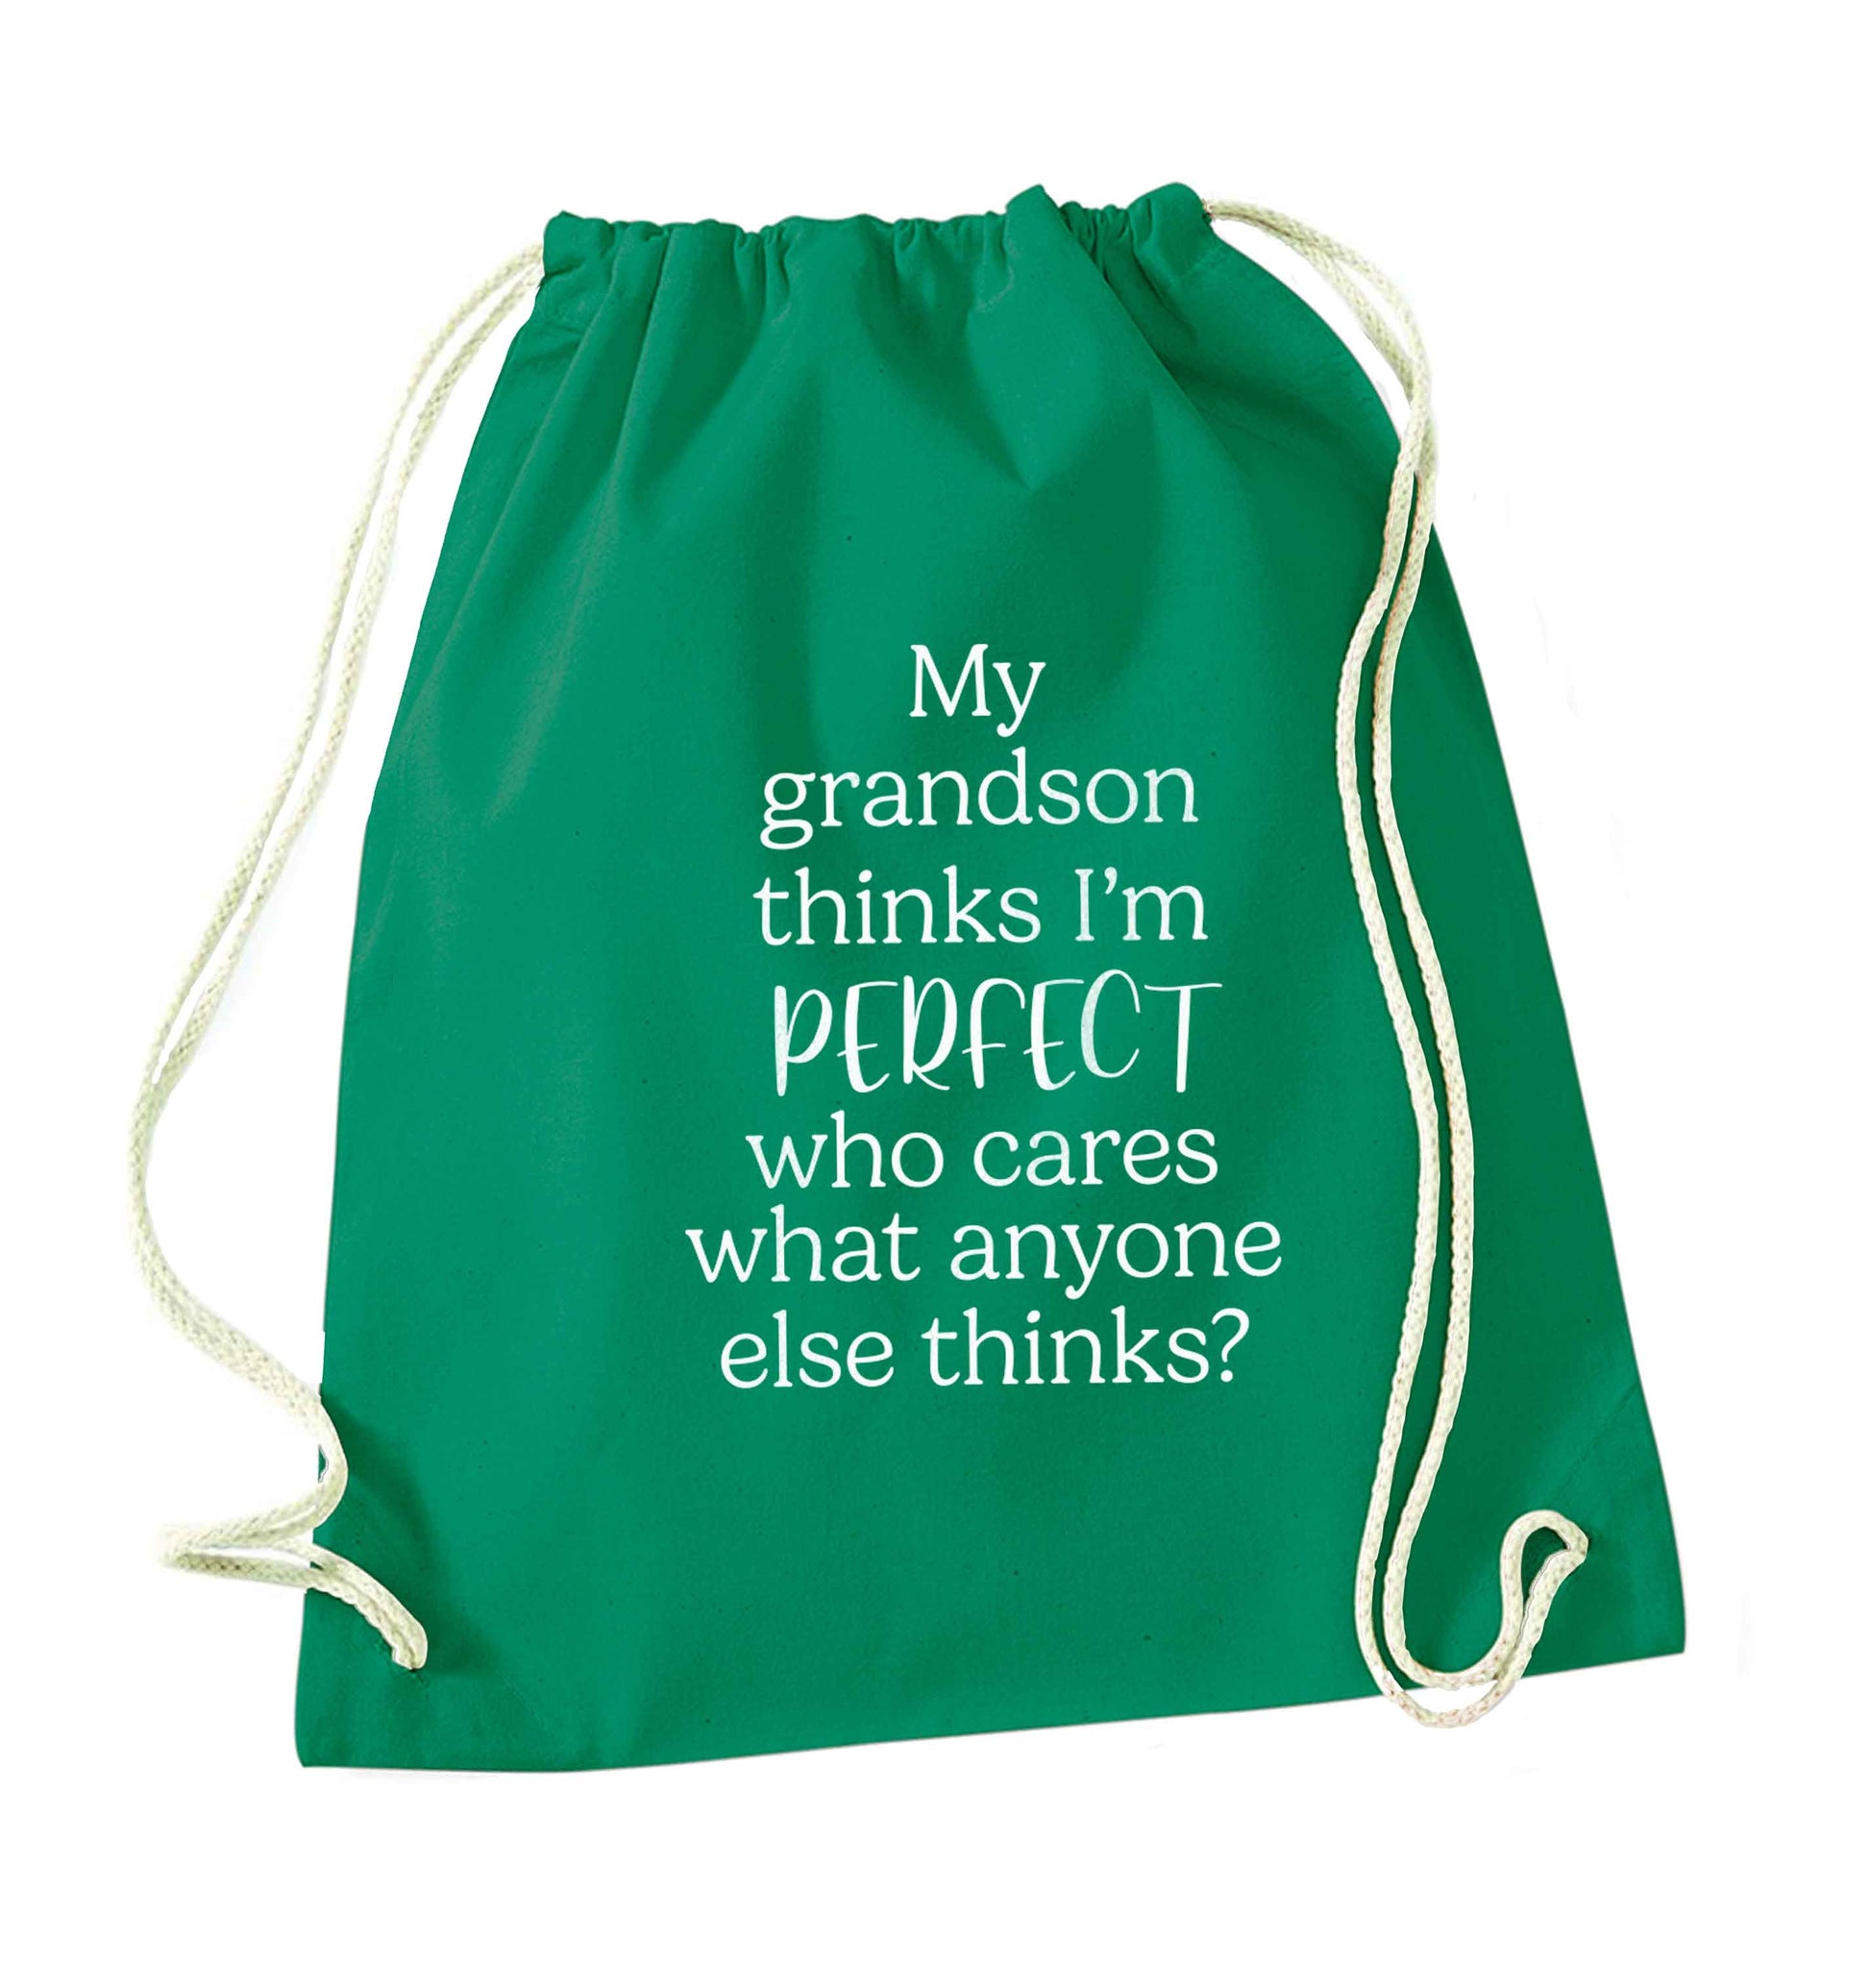 My Grandson thinks I'm perfect who cares what anyone else thinks? green drawstring bag